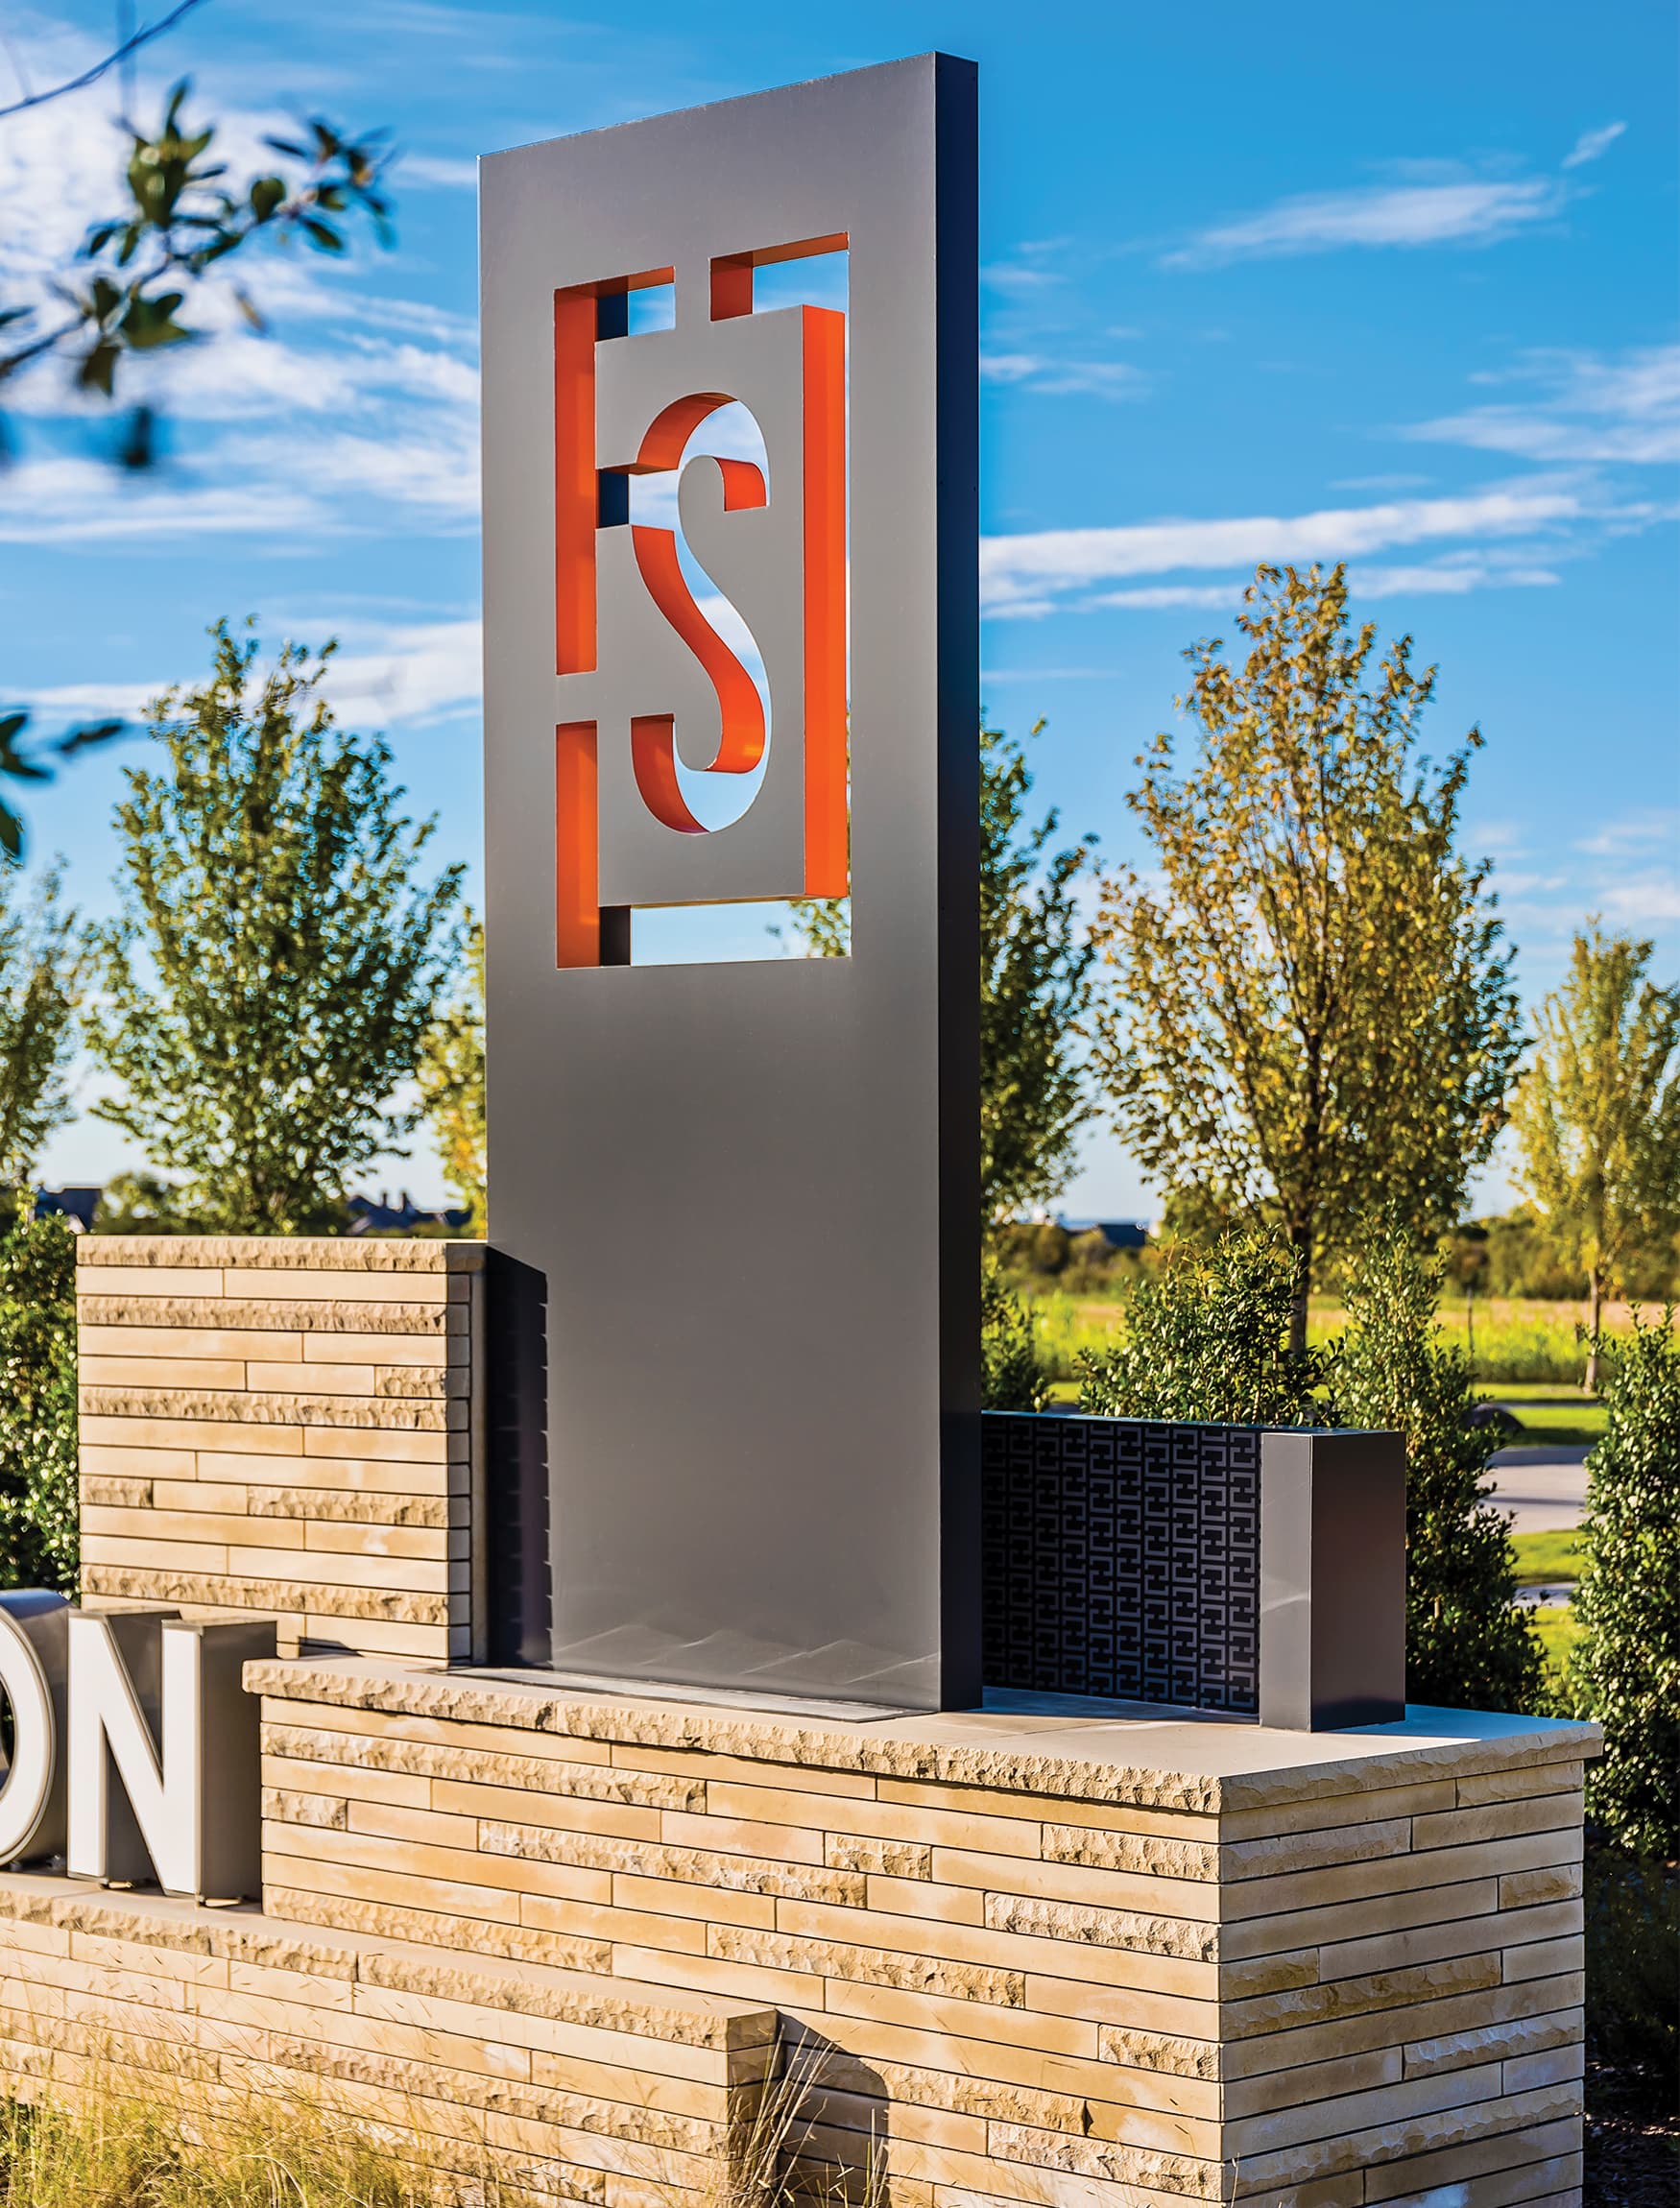 Frisco Station, a mixed-use project in Frisco, Texas, project identity monument